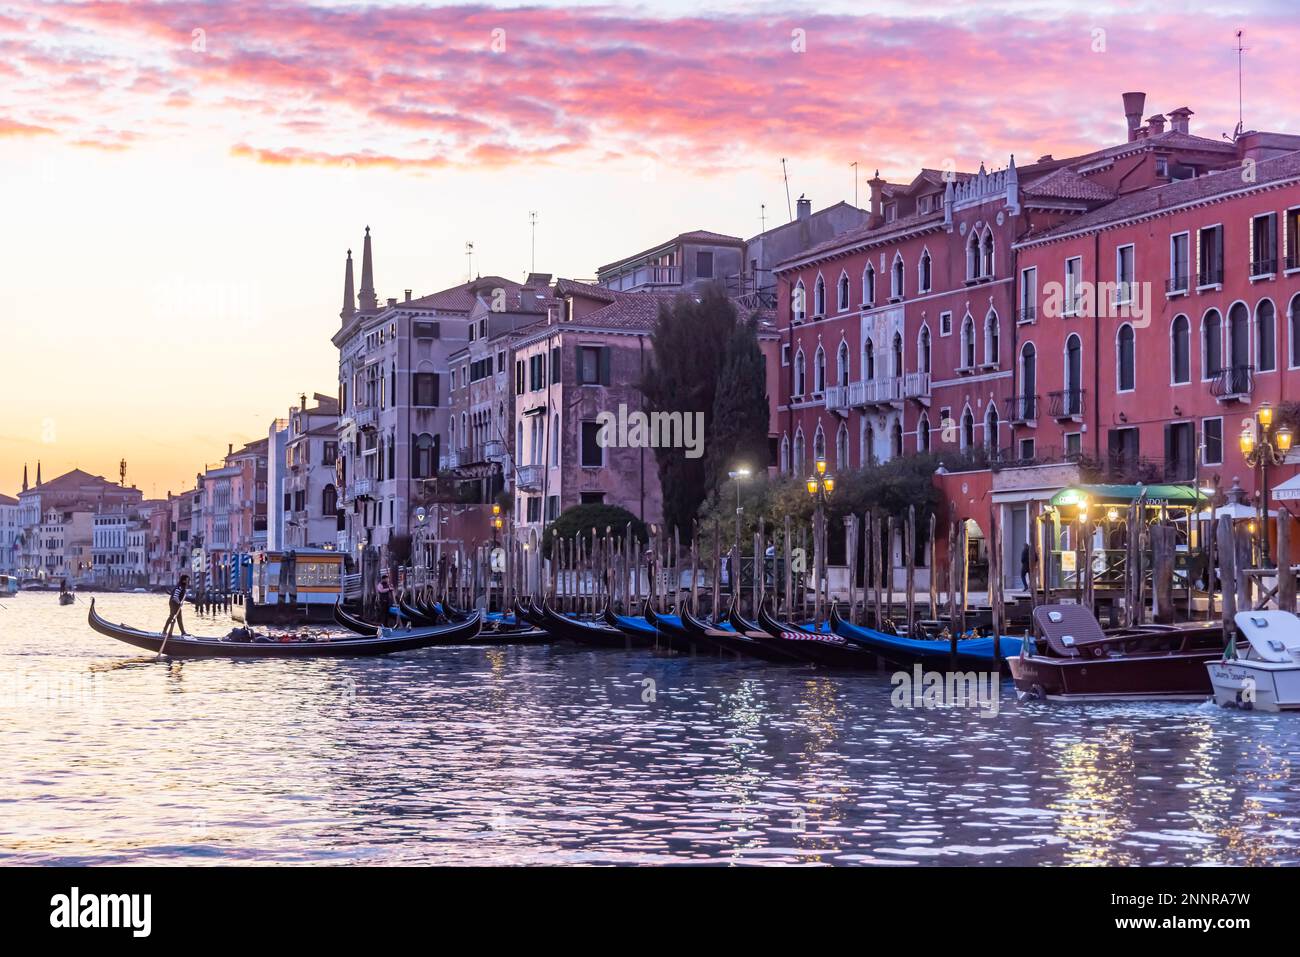 Evening atmosphere on the Grand Canal, Venice, Italy Stock Photo